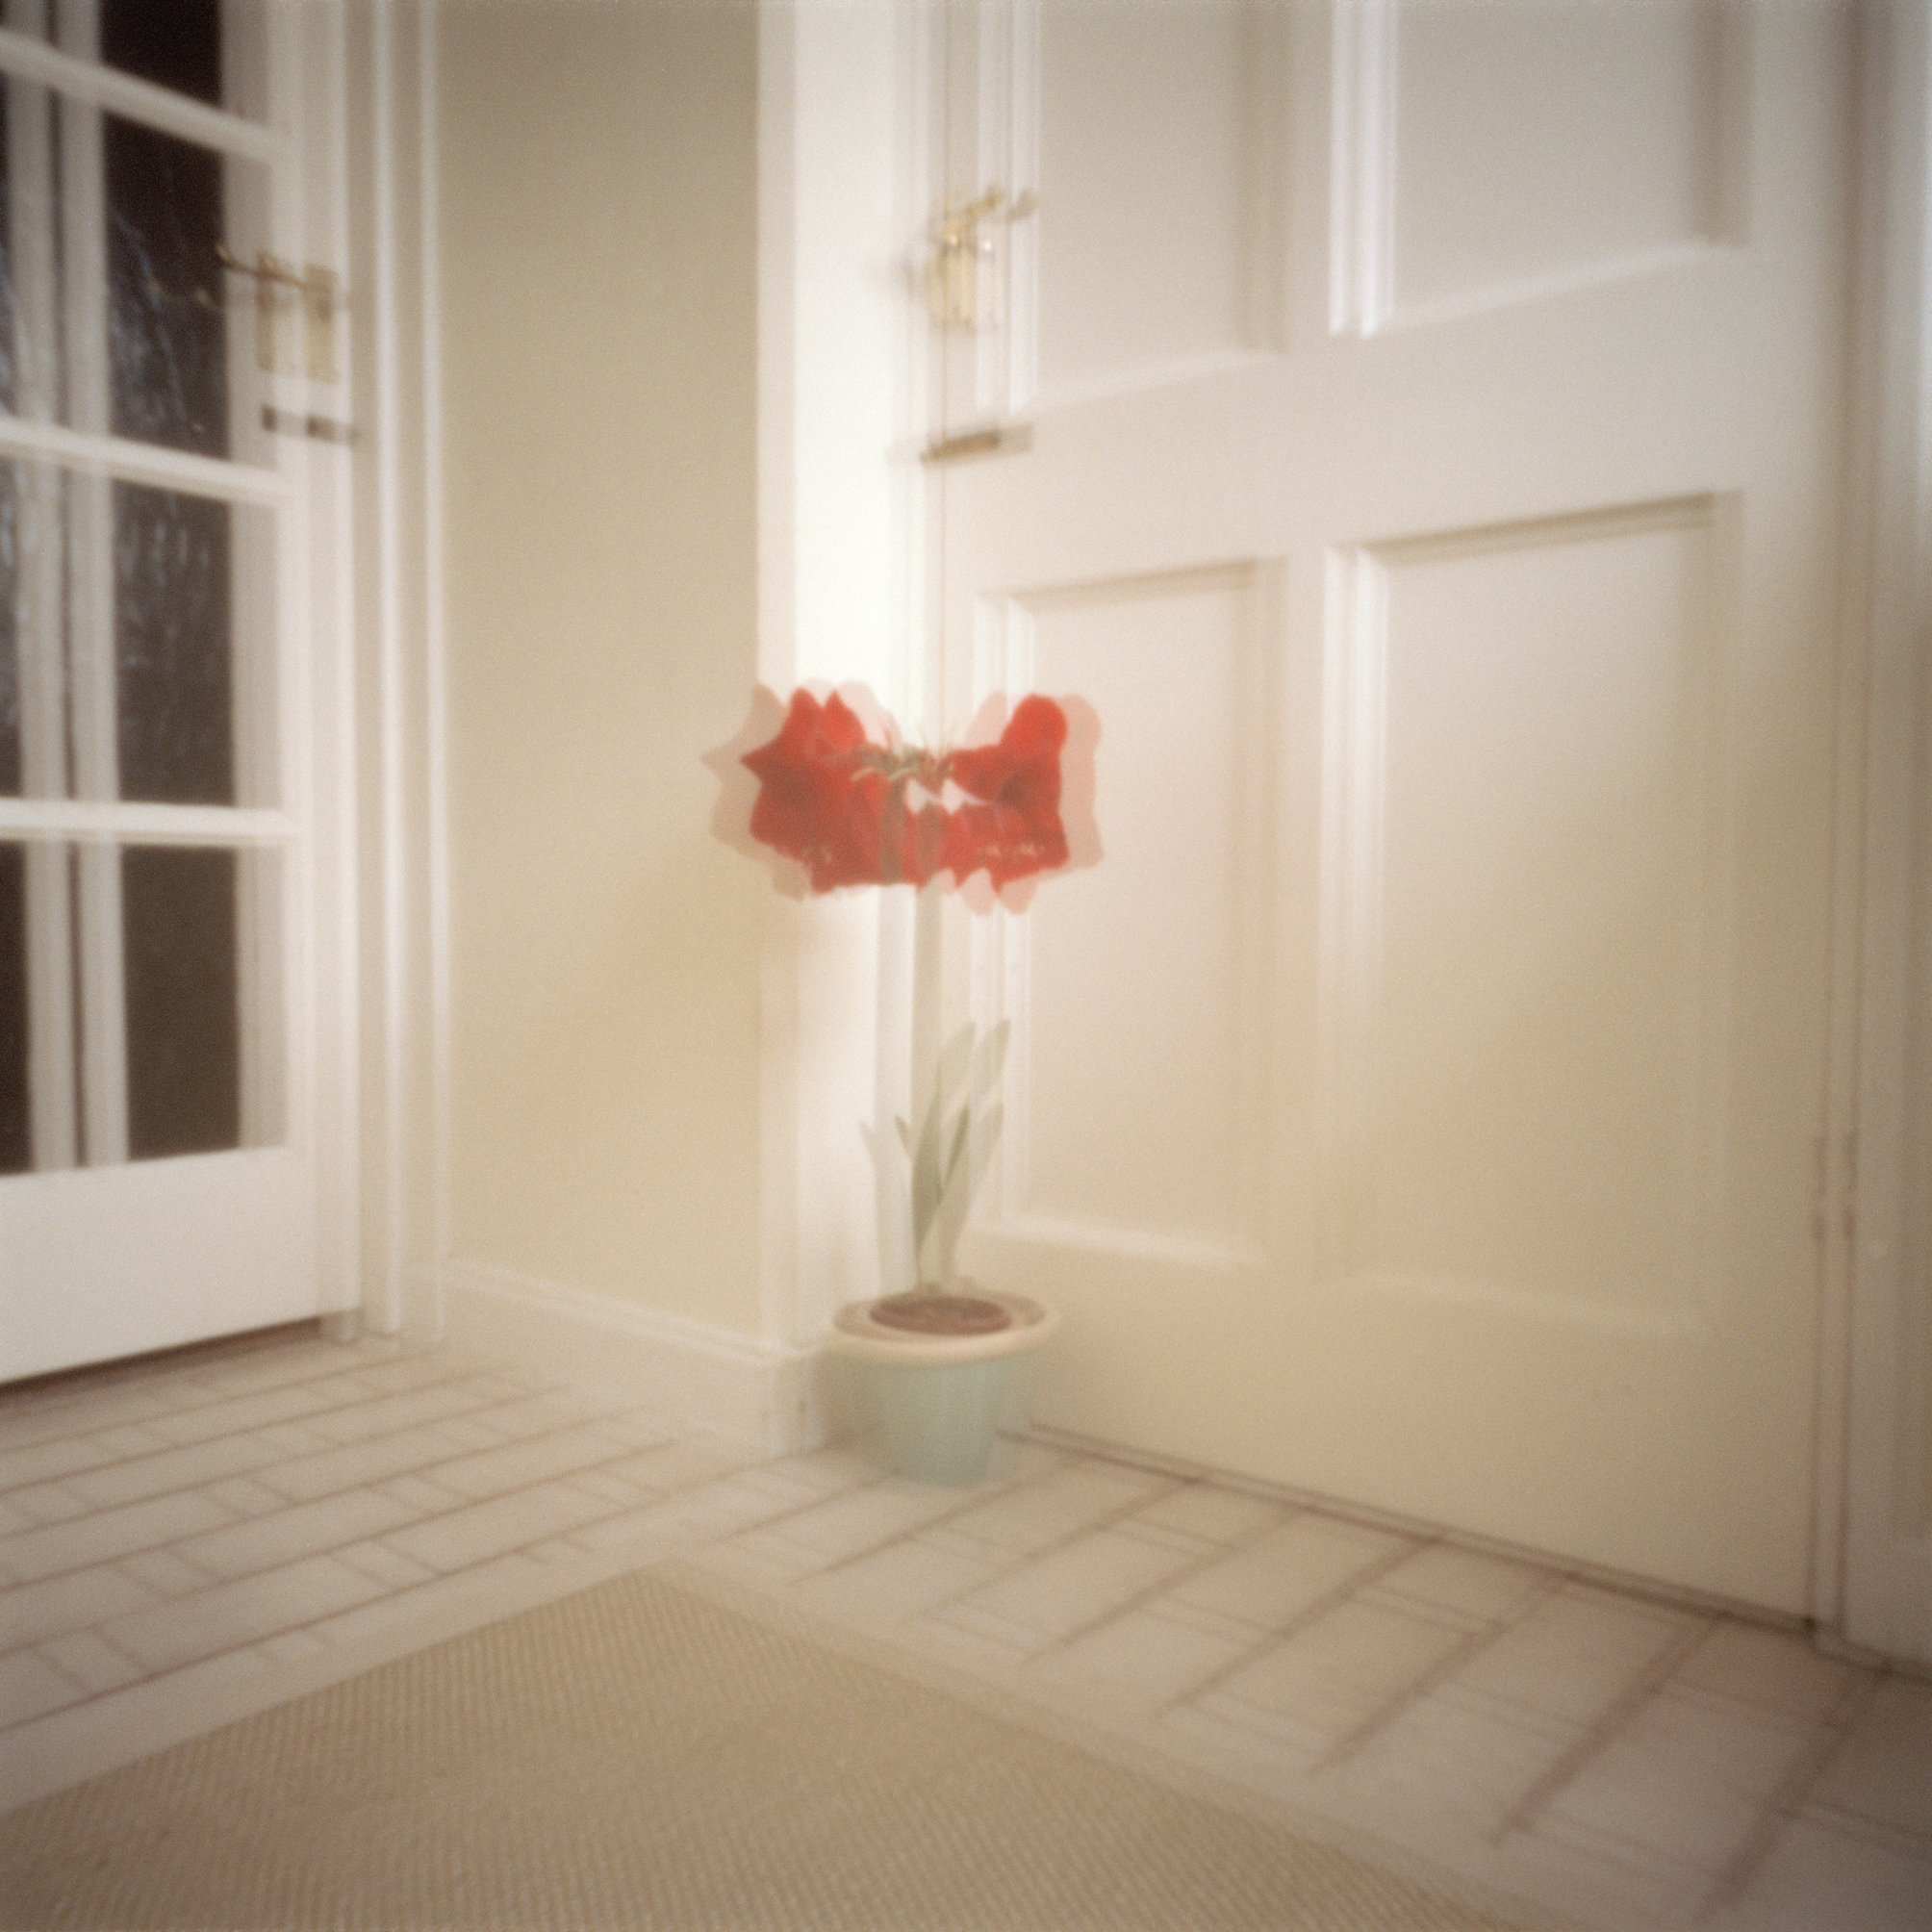 shoe room with red flower.jpg